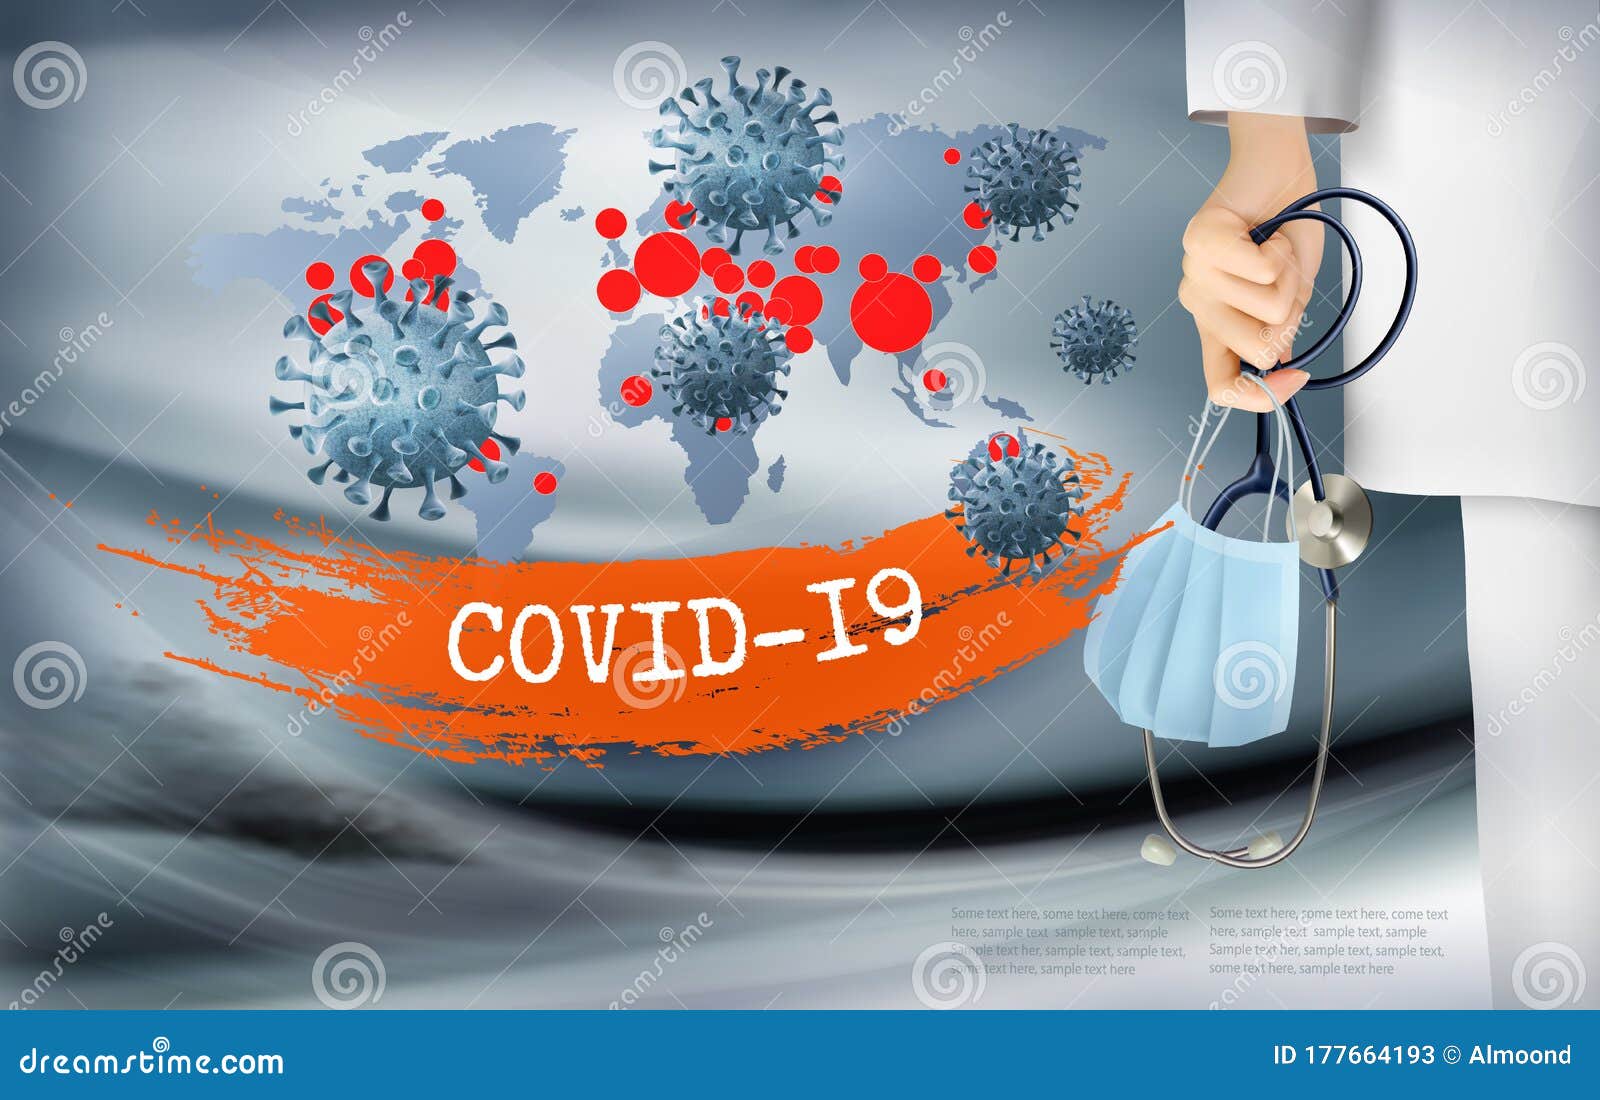 coranavirus background with doctor holding a protective medical surgical face mask